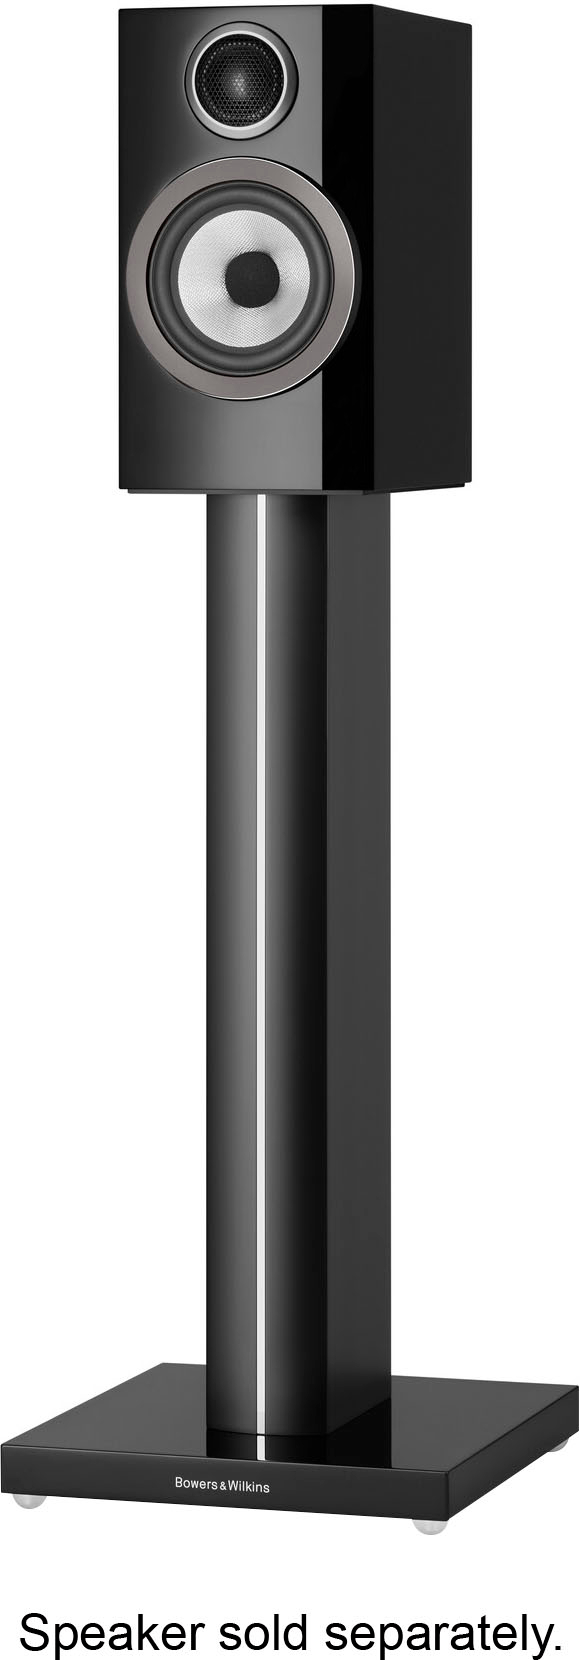 Left View: Bowers & Wilkins - FS-700 S3 Speaker Stands - Triple-Column Design, Compatible with 700 S3 Bookshelf Speakers, Cable Management - Black